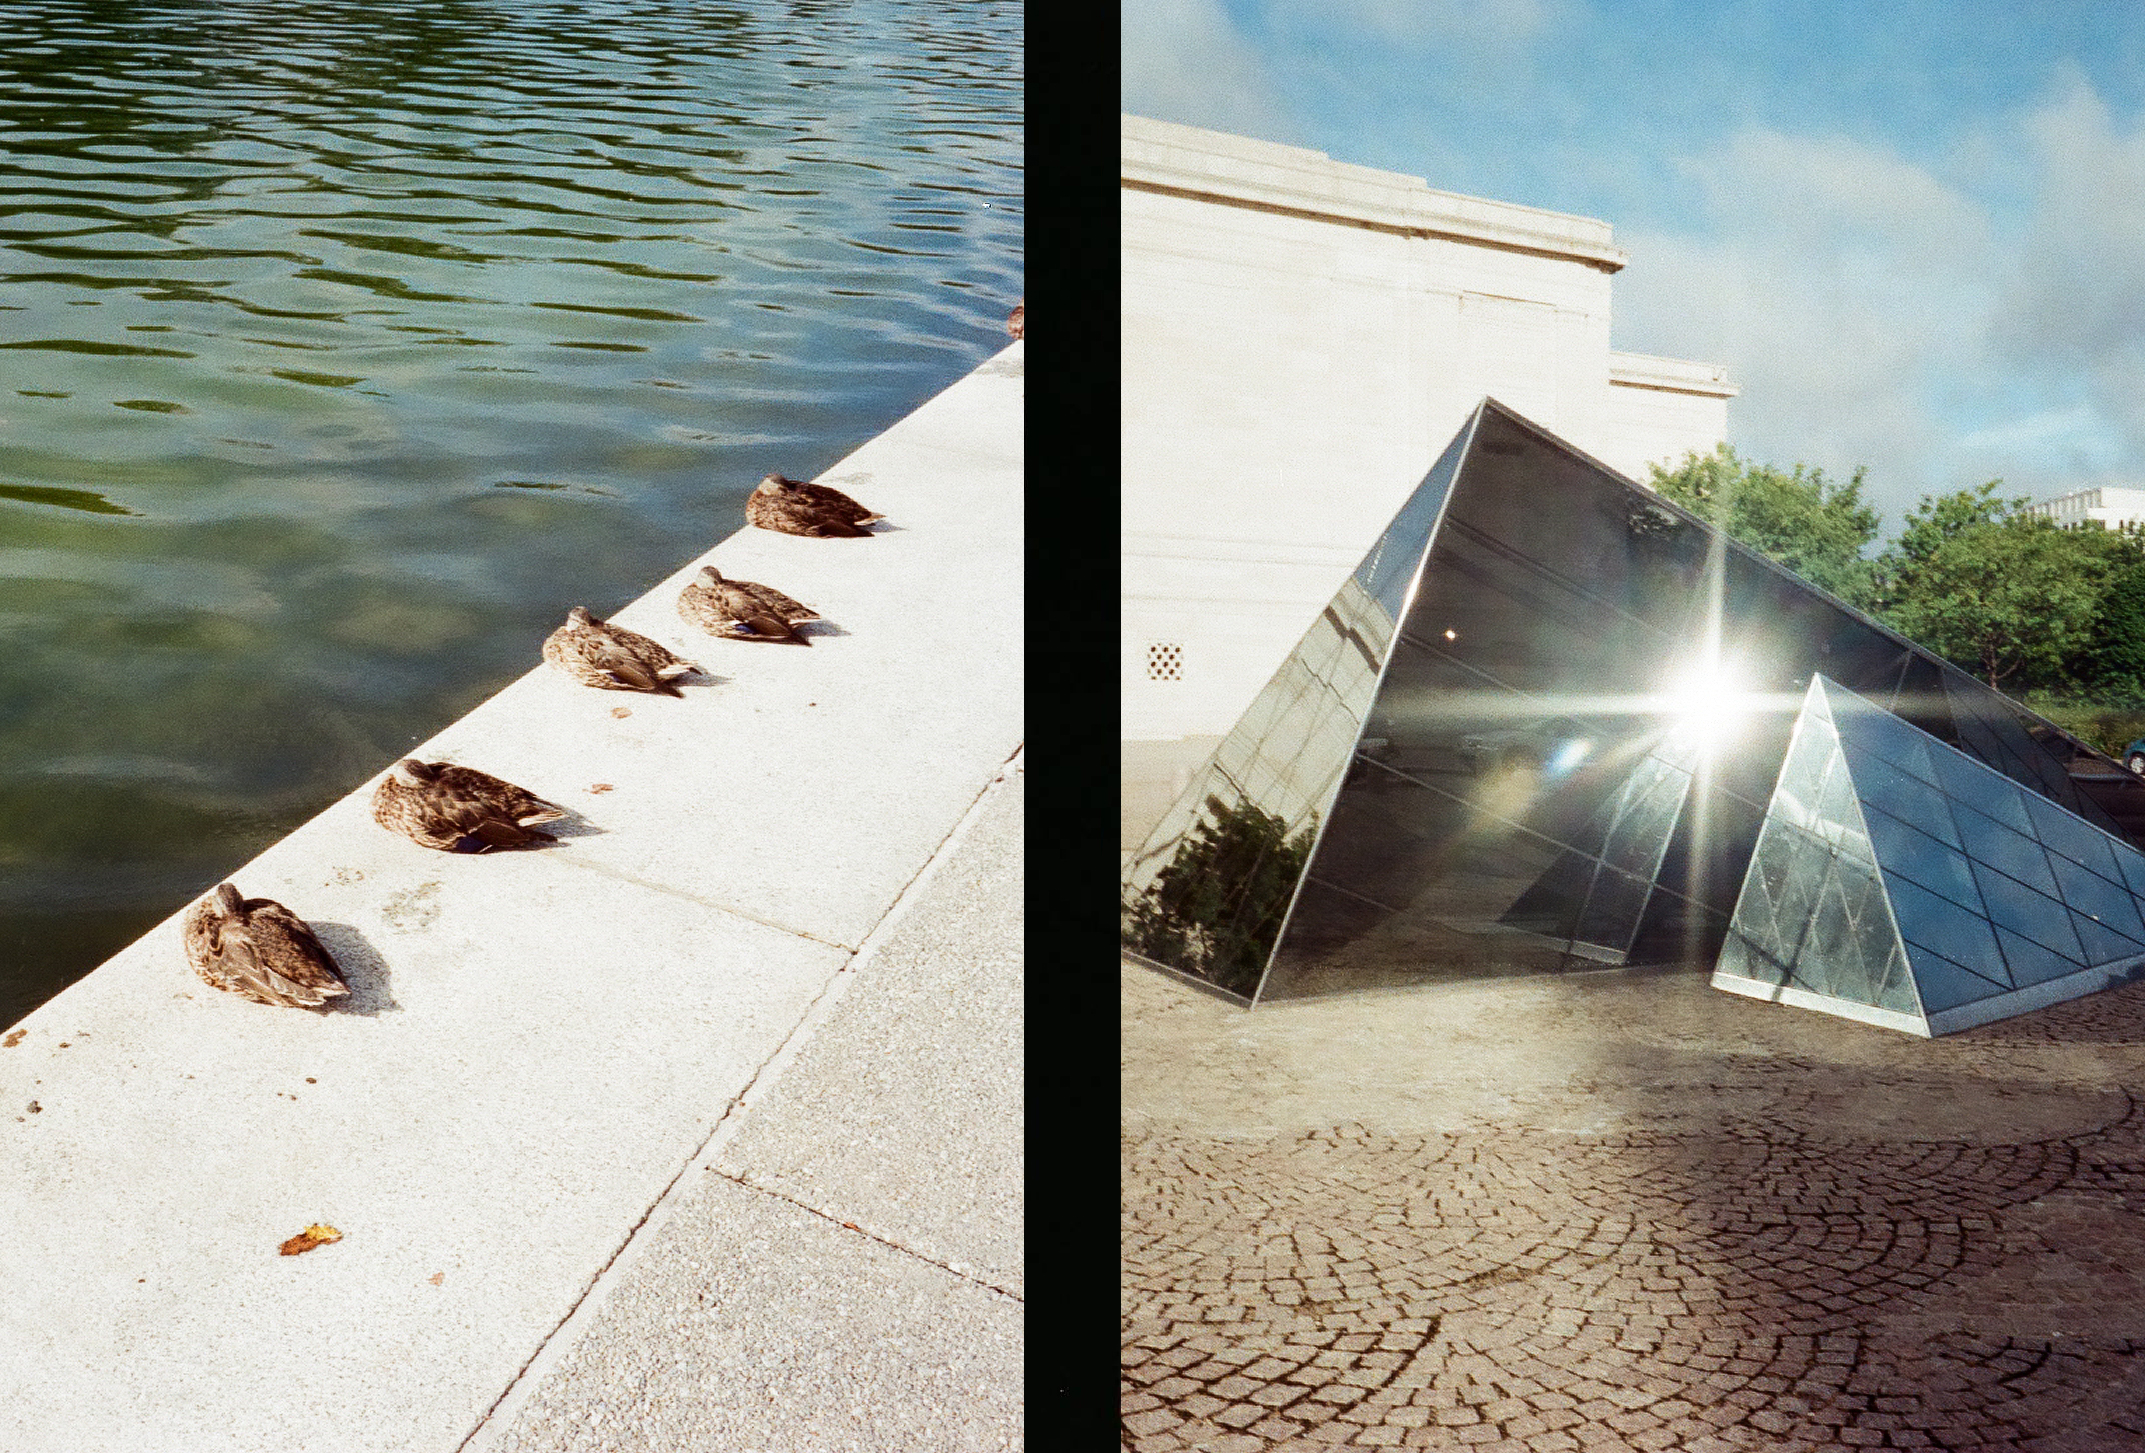 ducks resting by the reflecting pool and the sun reflecting off of a glass pyramid